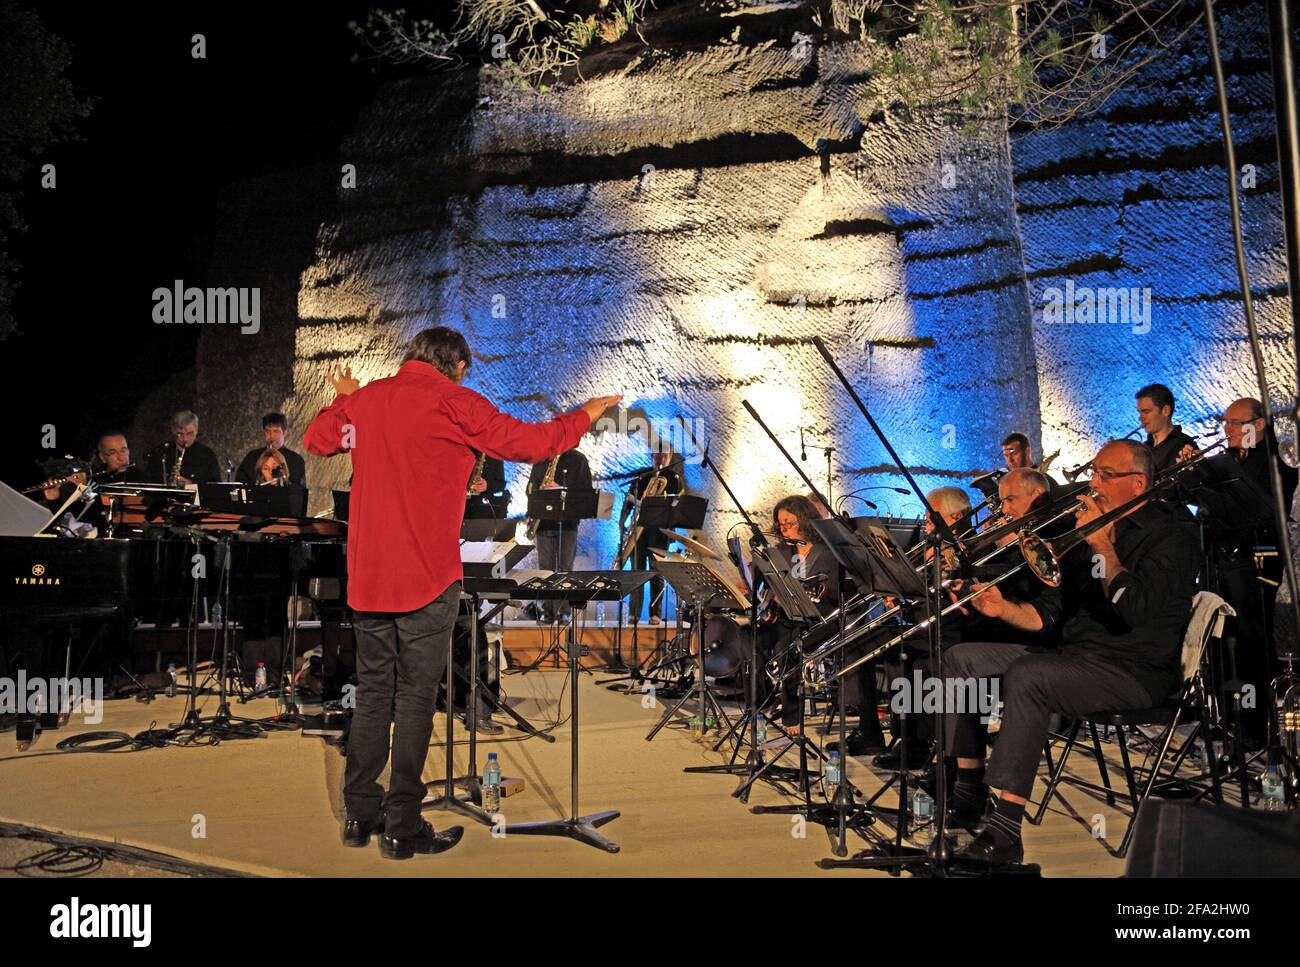 A conductor and Jazz orchestra on stage in the open air Carrieres du Bon Temps, Junas Quarries, Gard, France Stock Photo